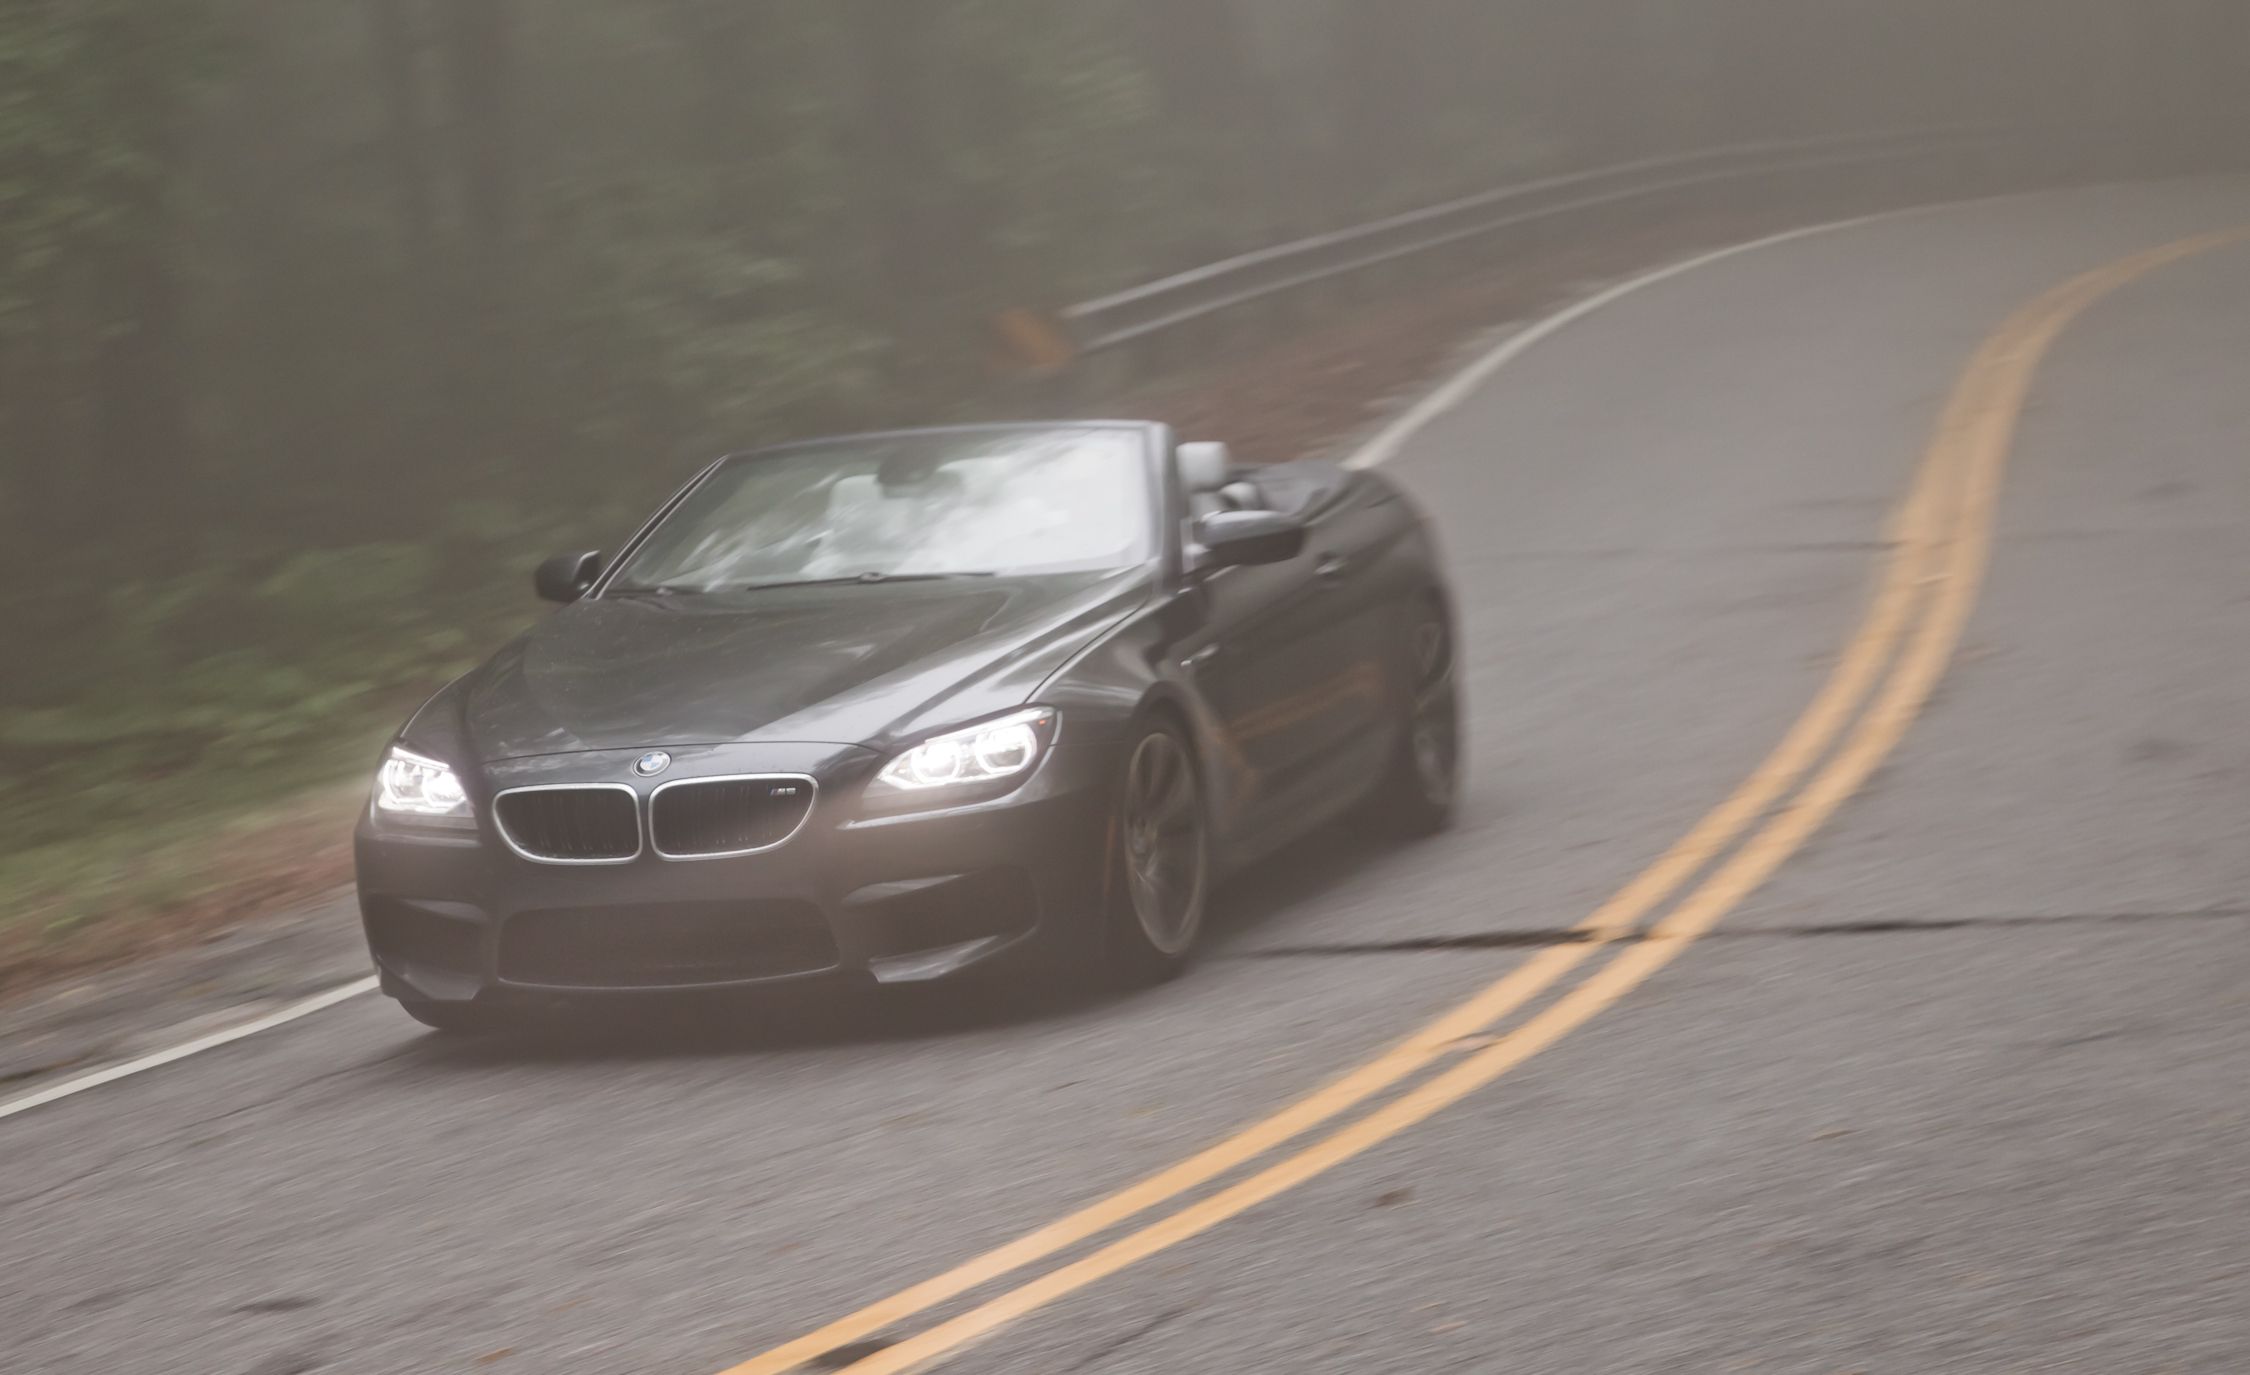 2012 Bmw M6 Convertible Test Drive Front And Side View (View 14 of 30)